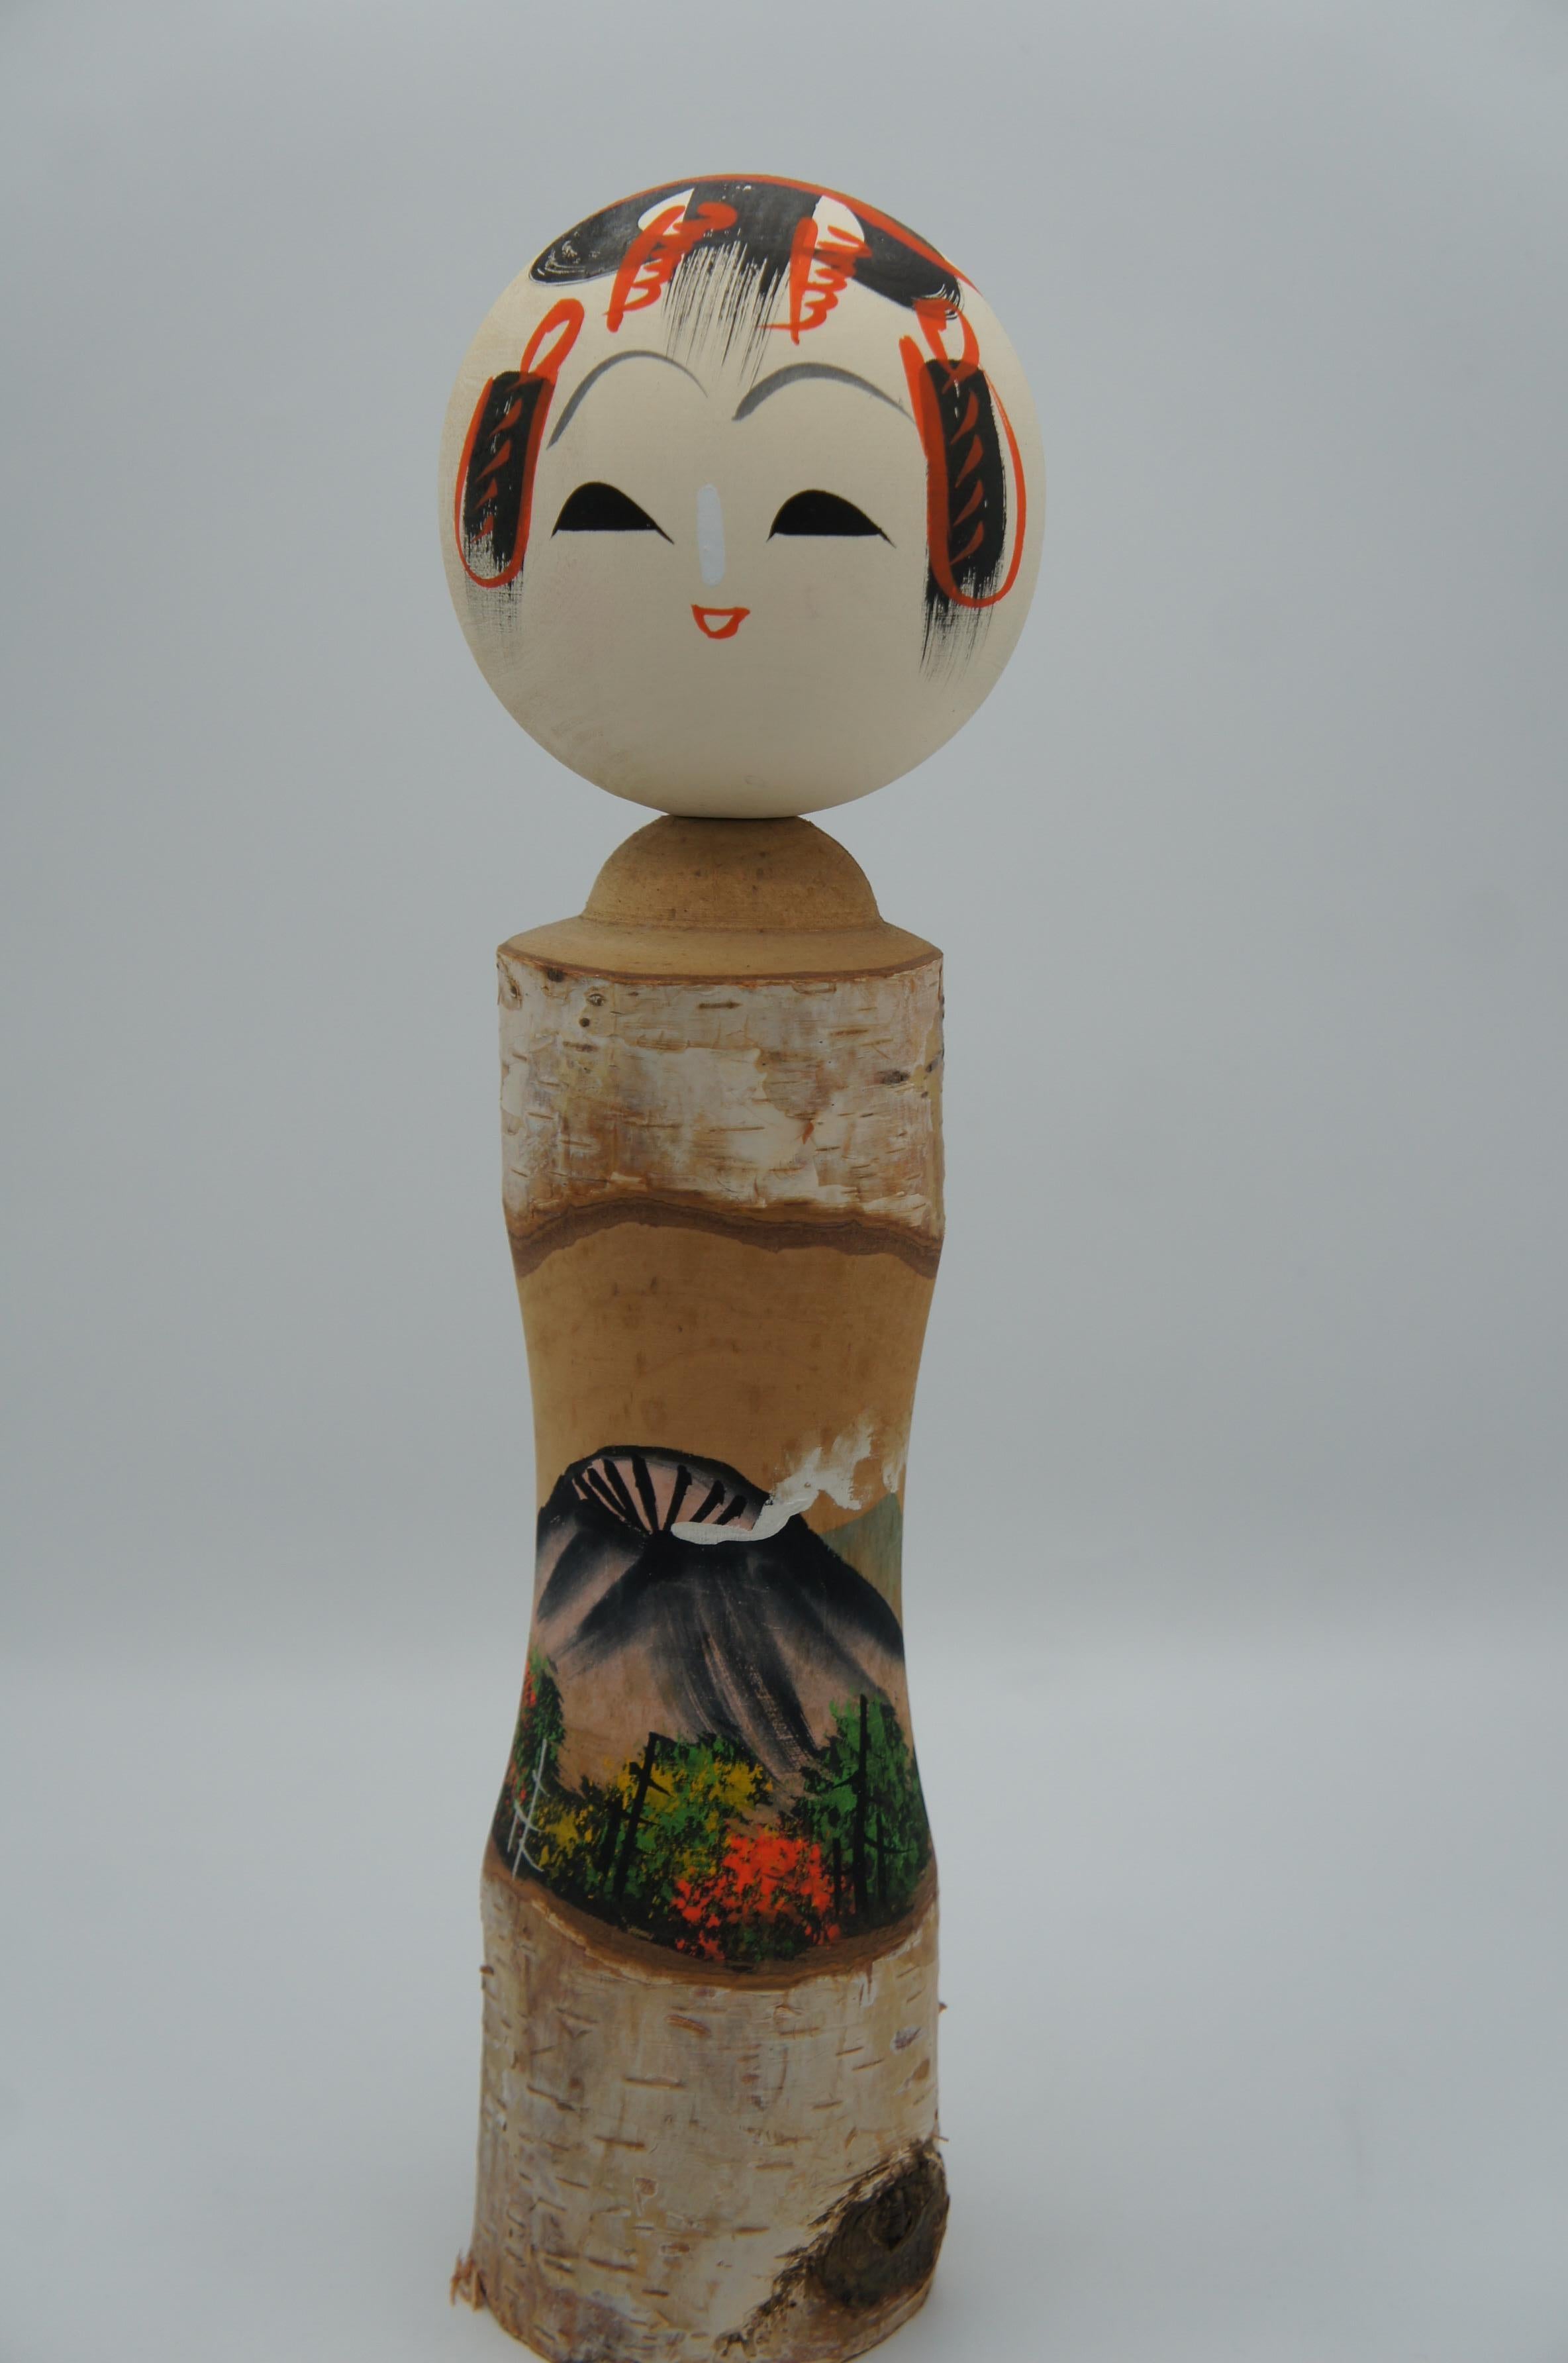 This is a wooden kokeshi doll made around 1980s in Showa era.
It was made in Nagano prefecture in Japan.
The wood is a white birch. 

Betula platyphylla, the Asian white birch or Japanese white birch, is a tree species in the family Betulaceae.